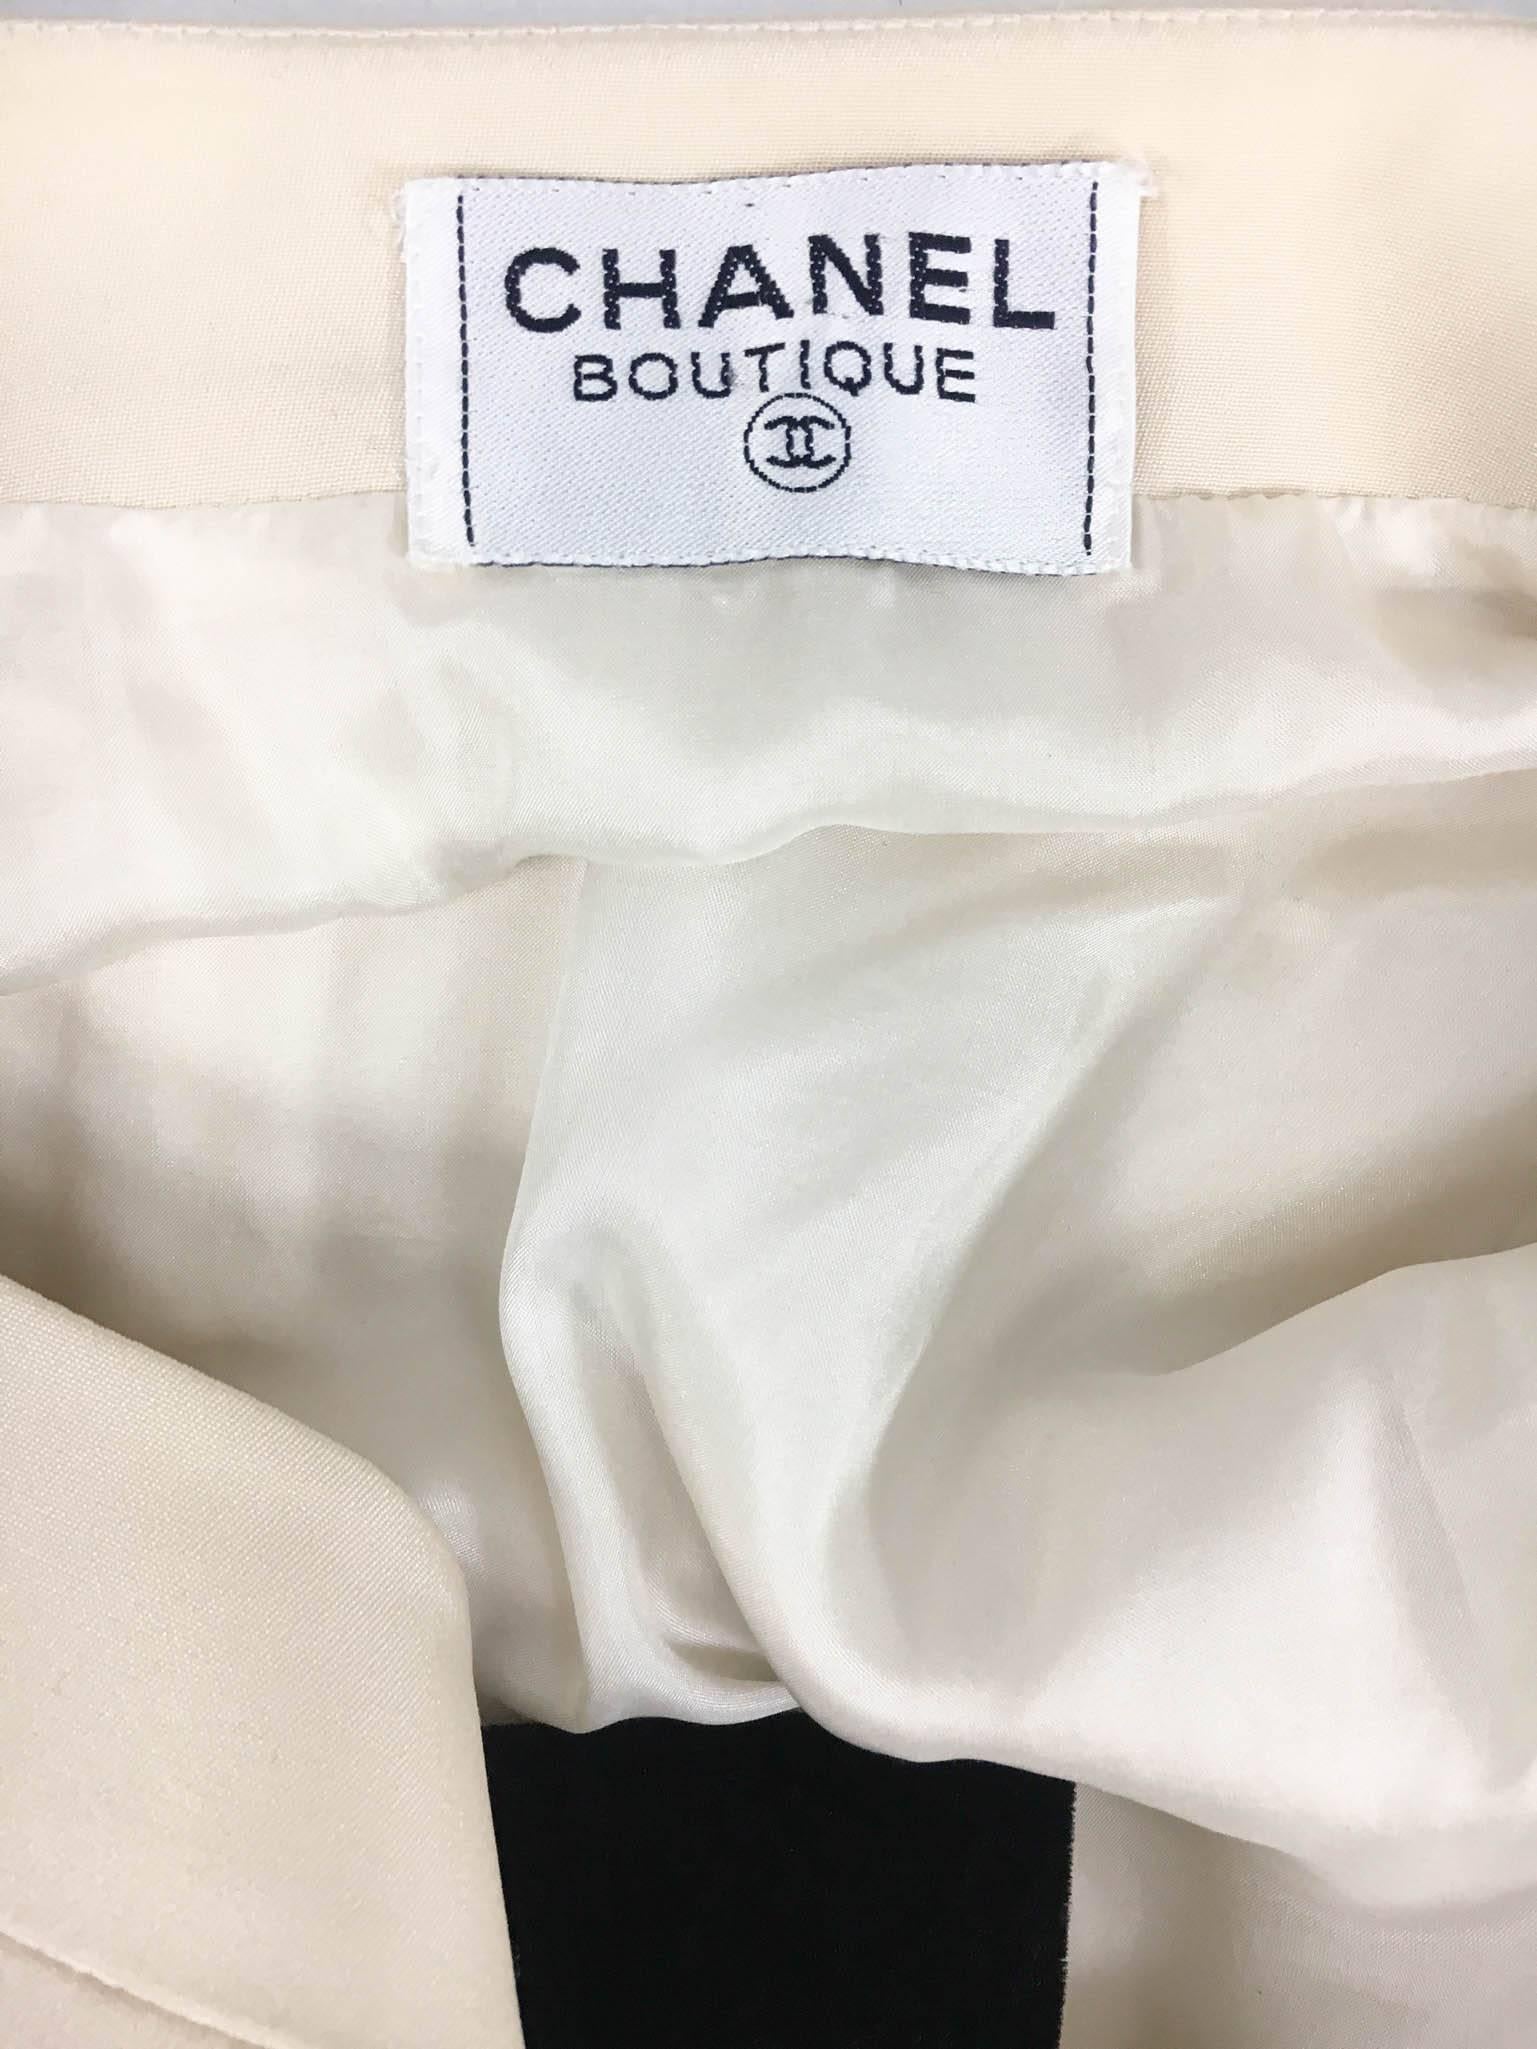 Chanel Champagne Silk Dress With Black Velvet Cuffs and Bow - 1980s For Sale 5